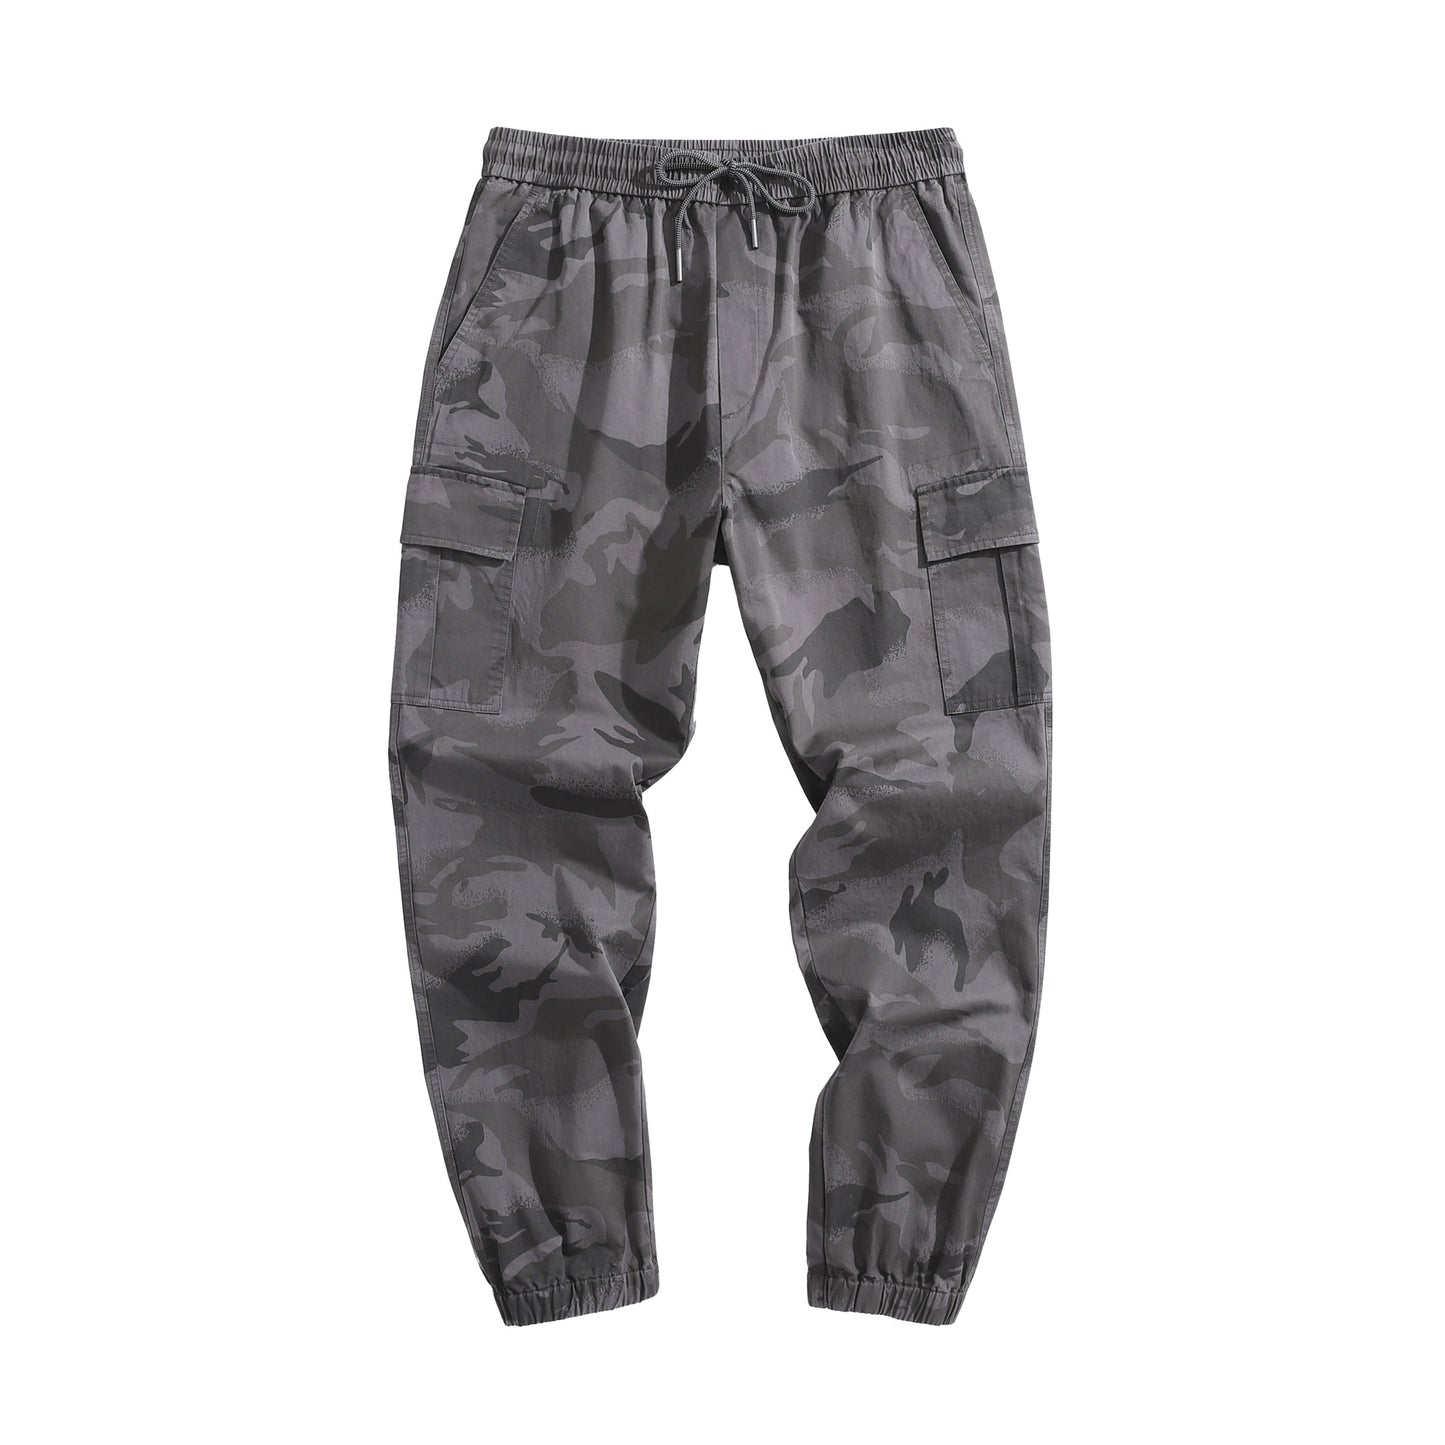 Camouflage multi bag overalls: Men's new fashion, all-around, strong belt, foot binding, leisure pants FashionExpress